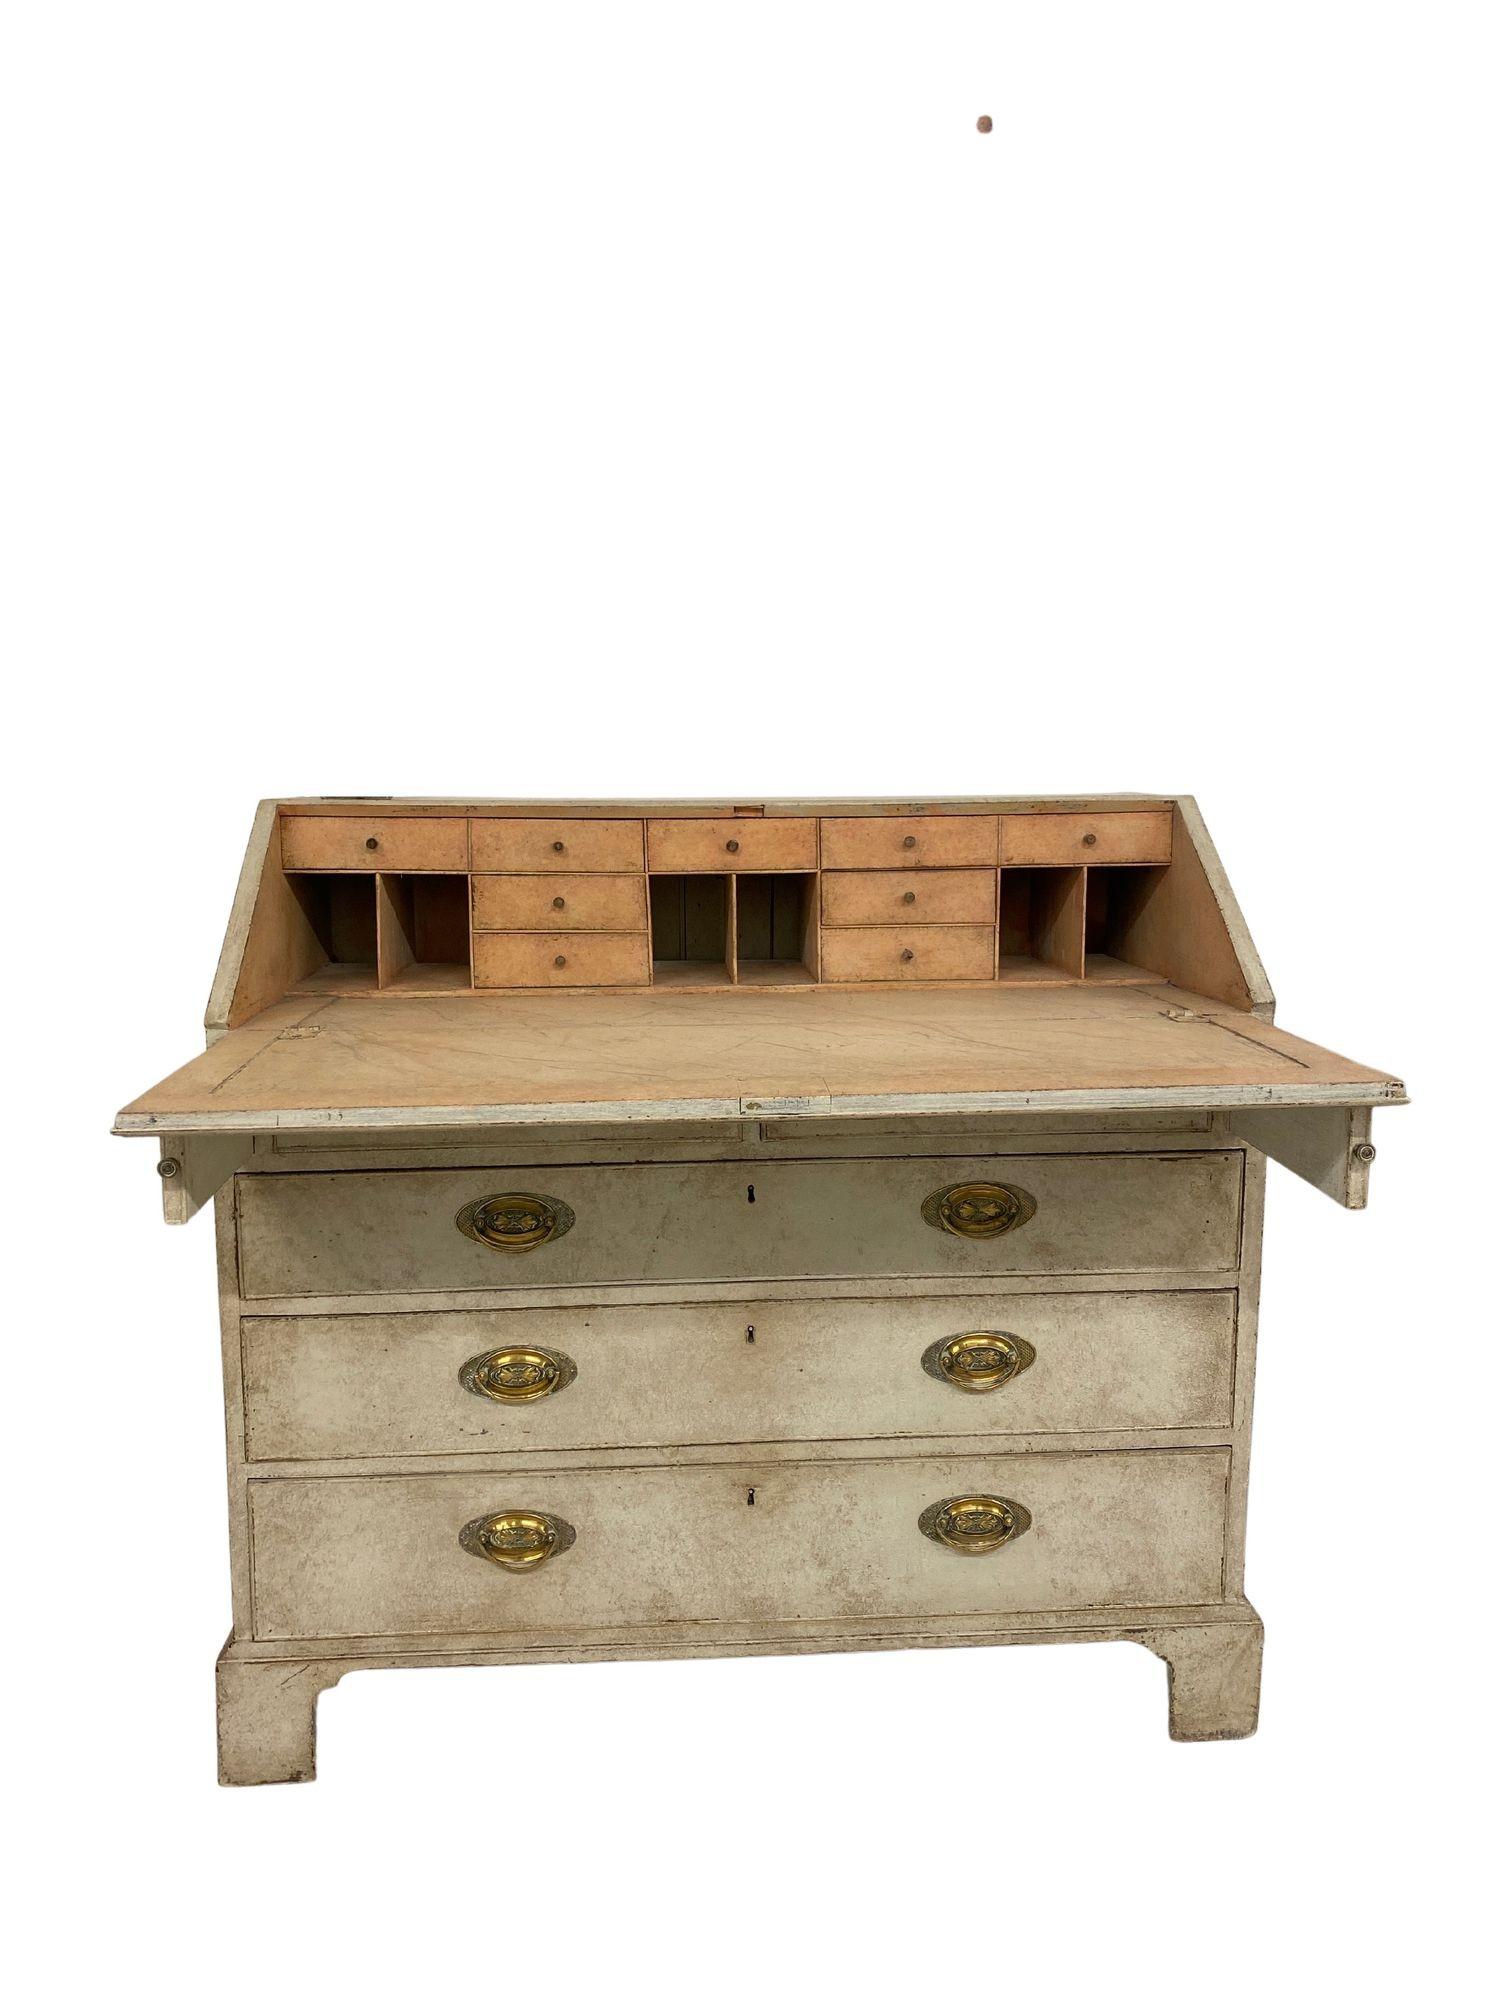 French Painted Secretary Desk with Fallfront, Mid 19th century For Sale 12